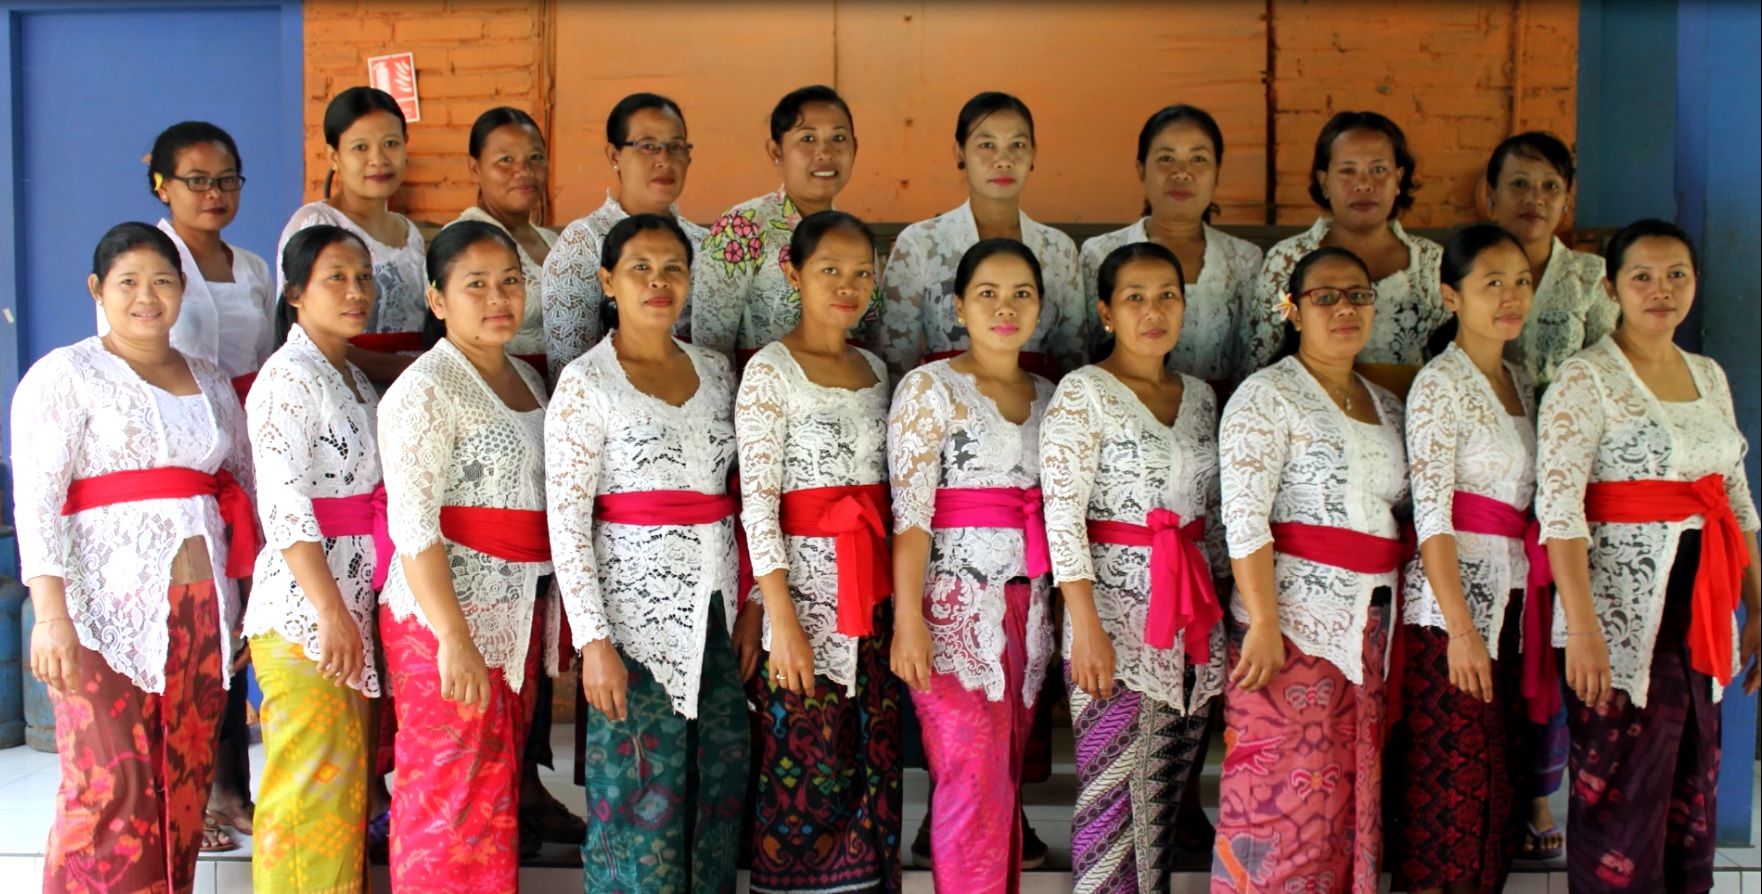 Group of Women in Traditional Balinese Clothing